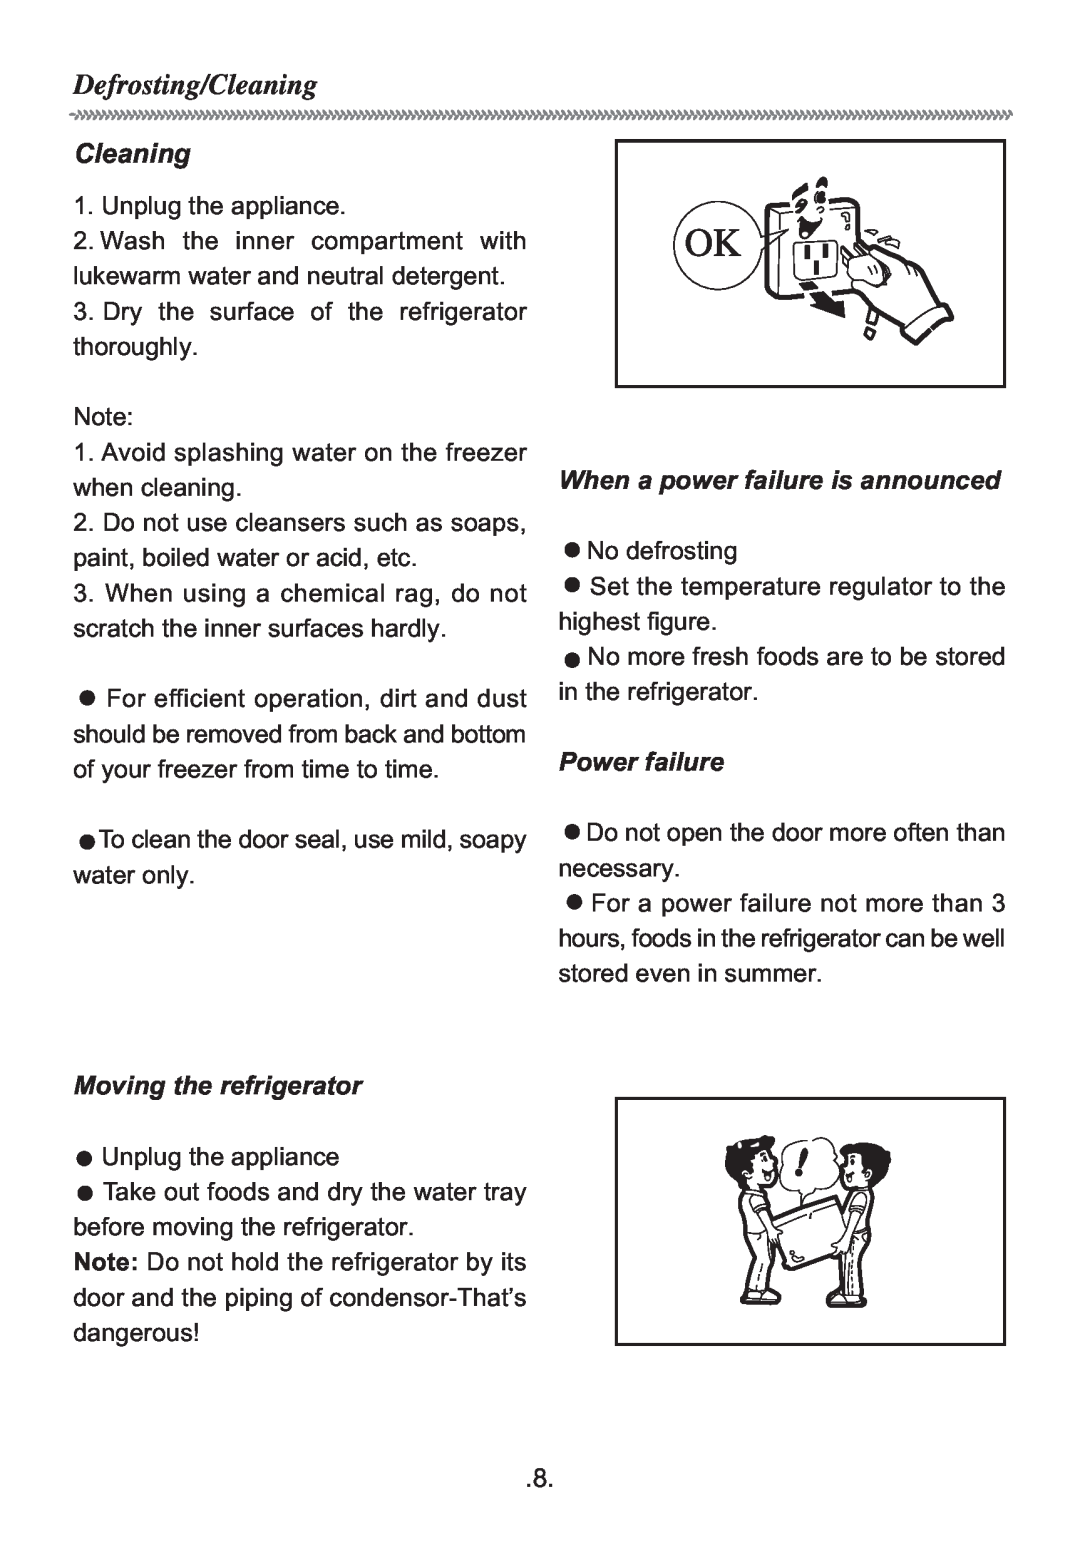 Haier HR-60A manual When a power failure is announced, Power failure, Moving the refrigerator, Defrosting/Cleaning 